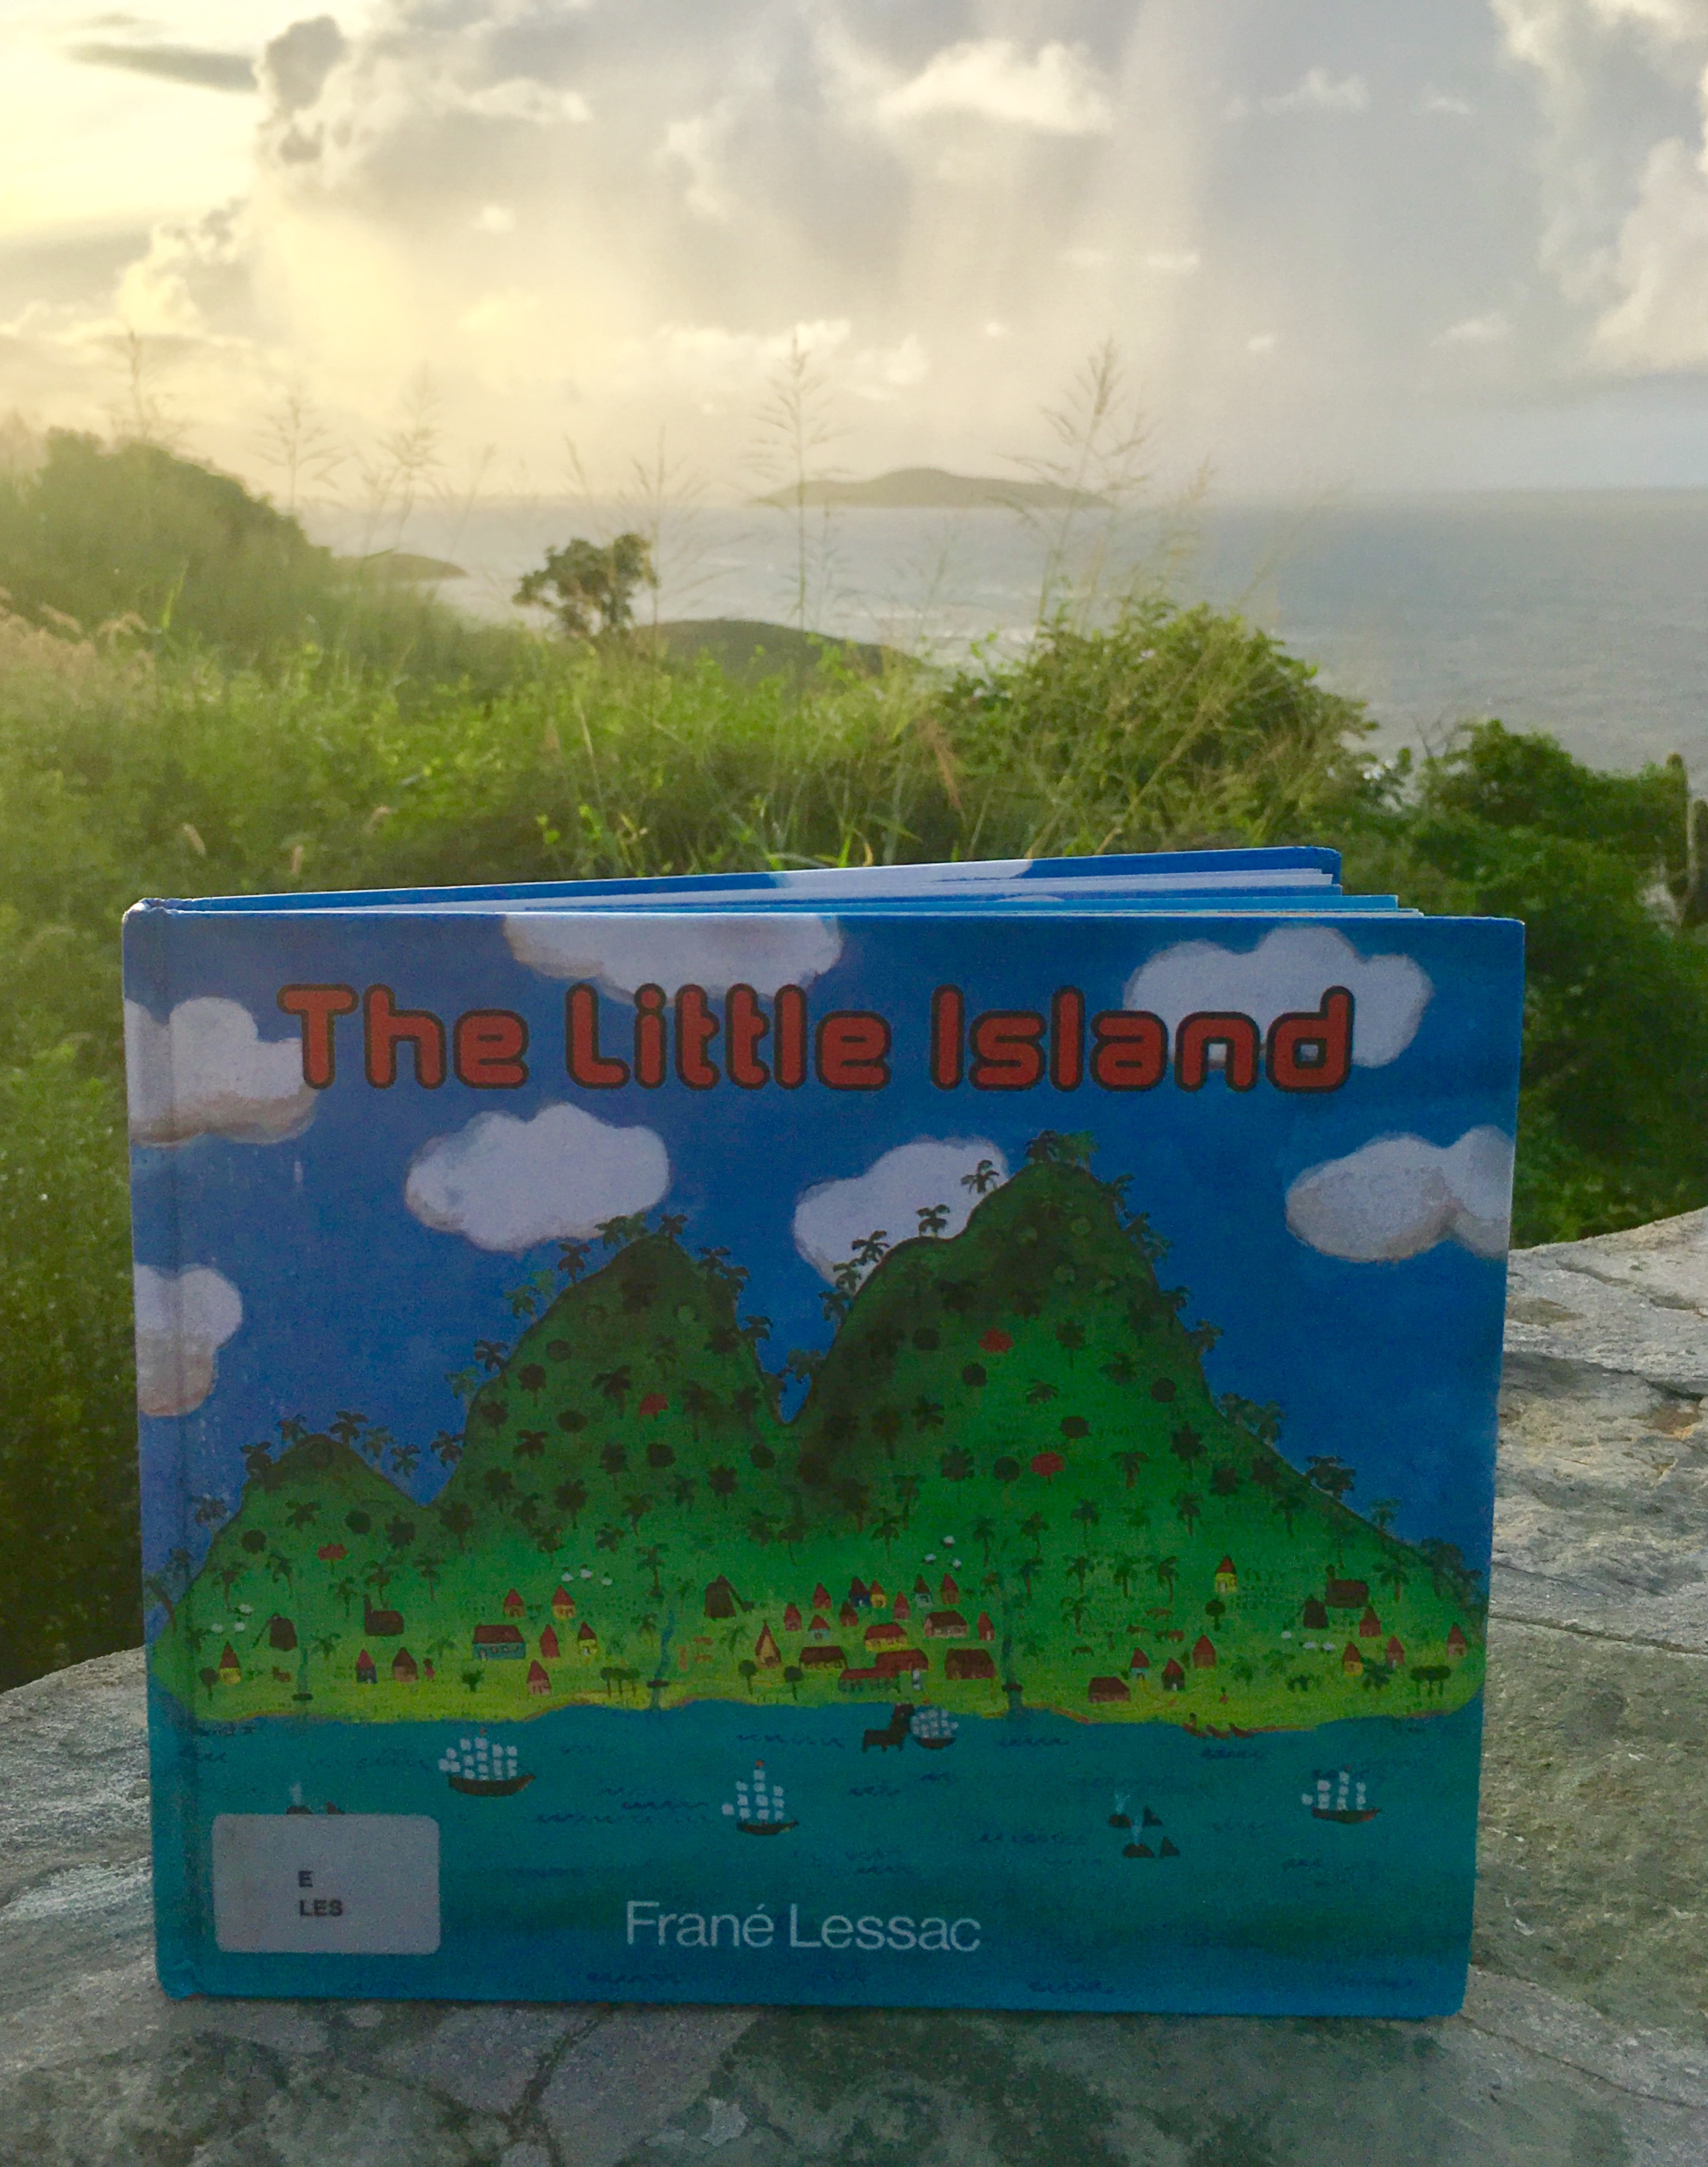 Book cover with island landscape in background